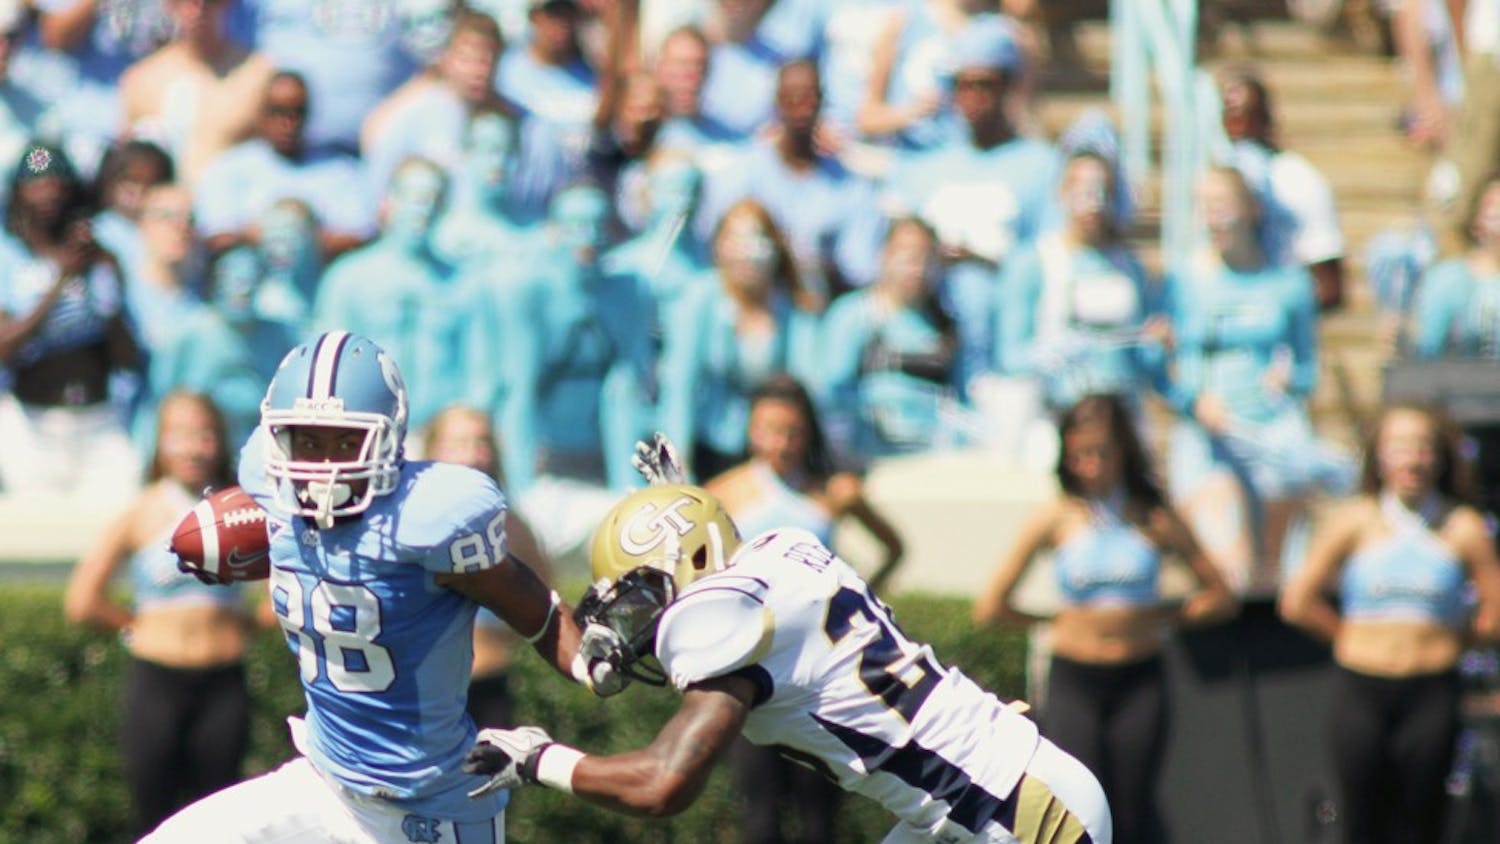 Erik Highsmith and the UNC wide receivers will have to face Rutgers’ safety Joe Lefeged on Saturday.
Lefeged is a playmaker across the field and received the defensive back of the week award last week.